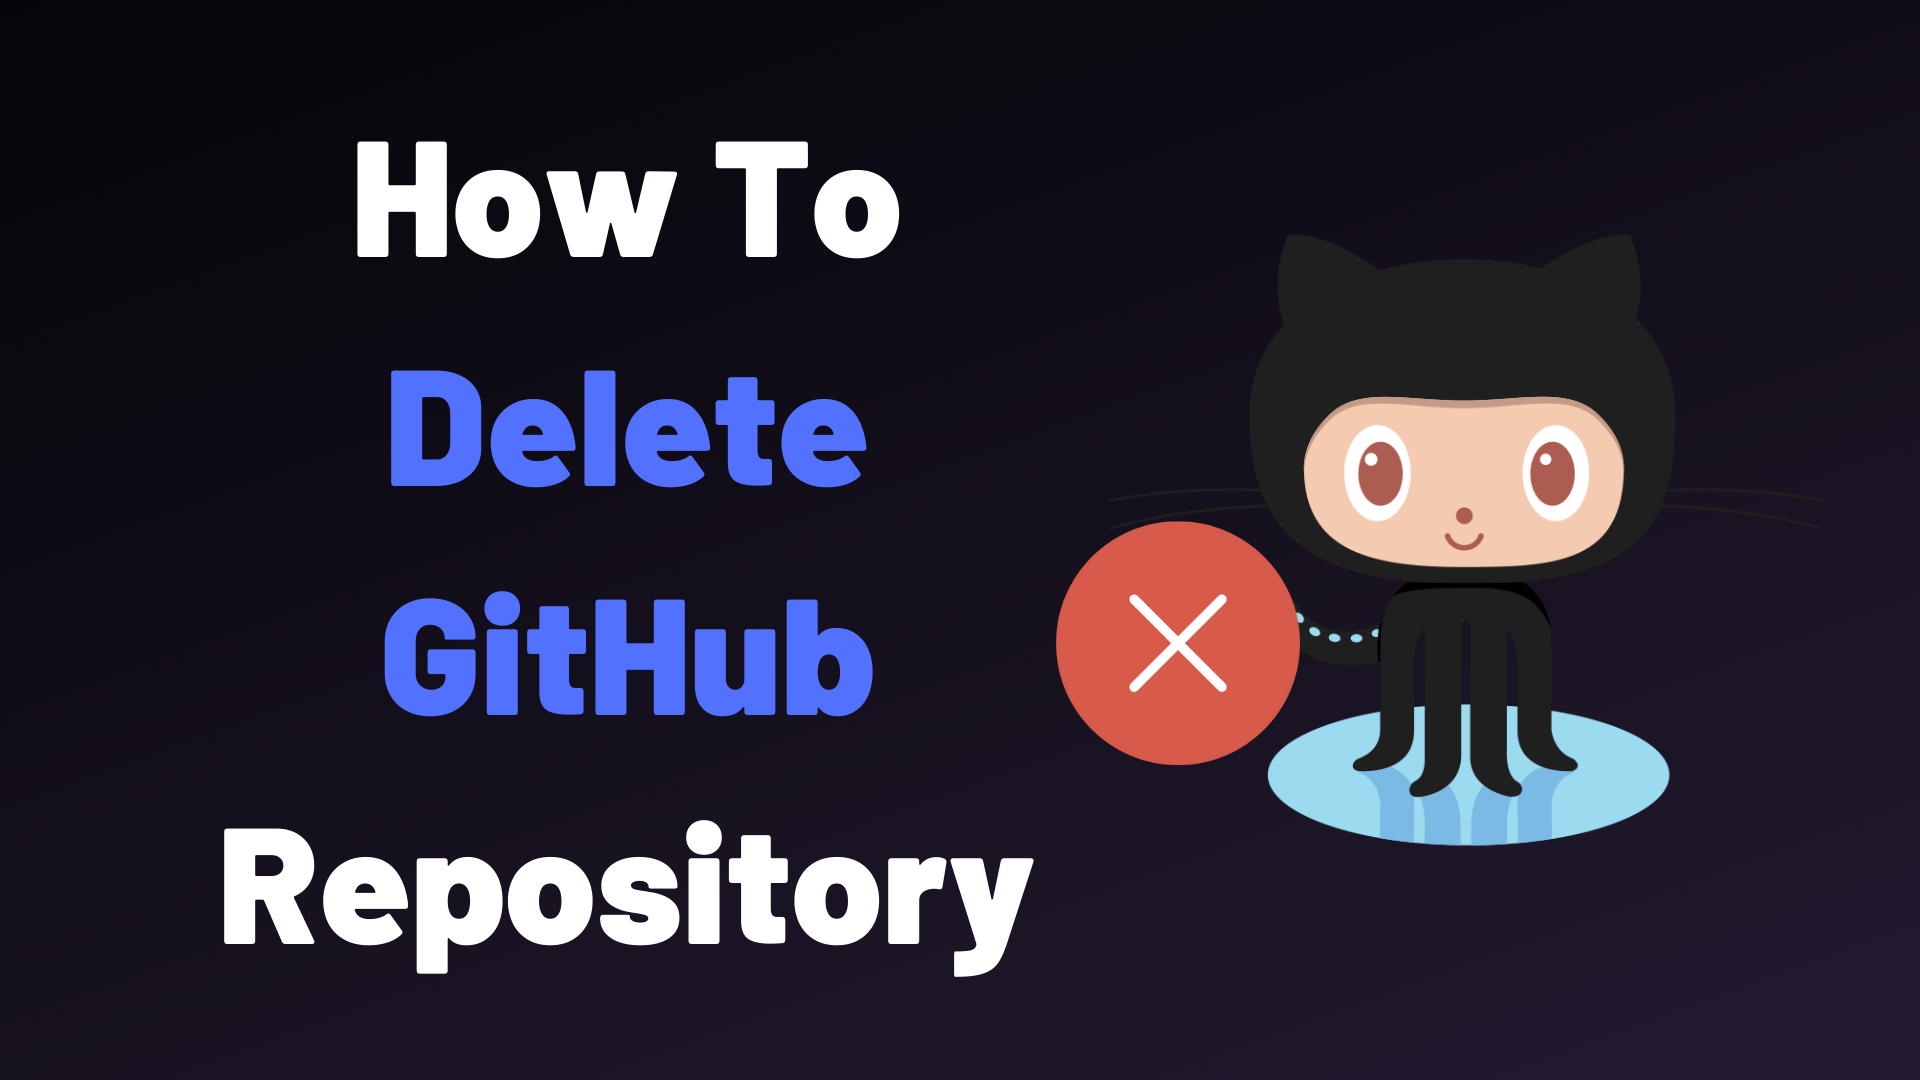 How To Delete The Repository In GitHub: Simple Ways For Your Help